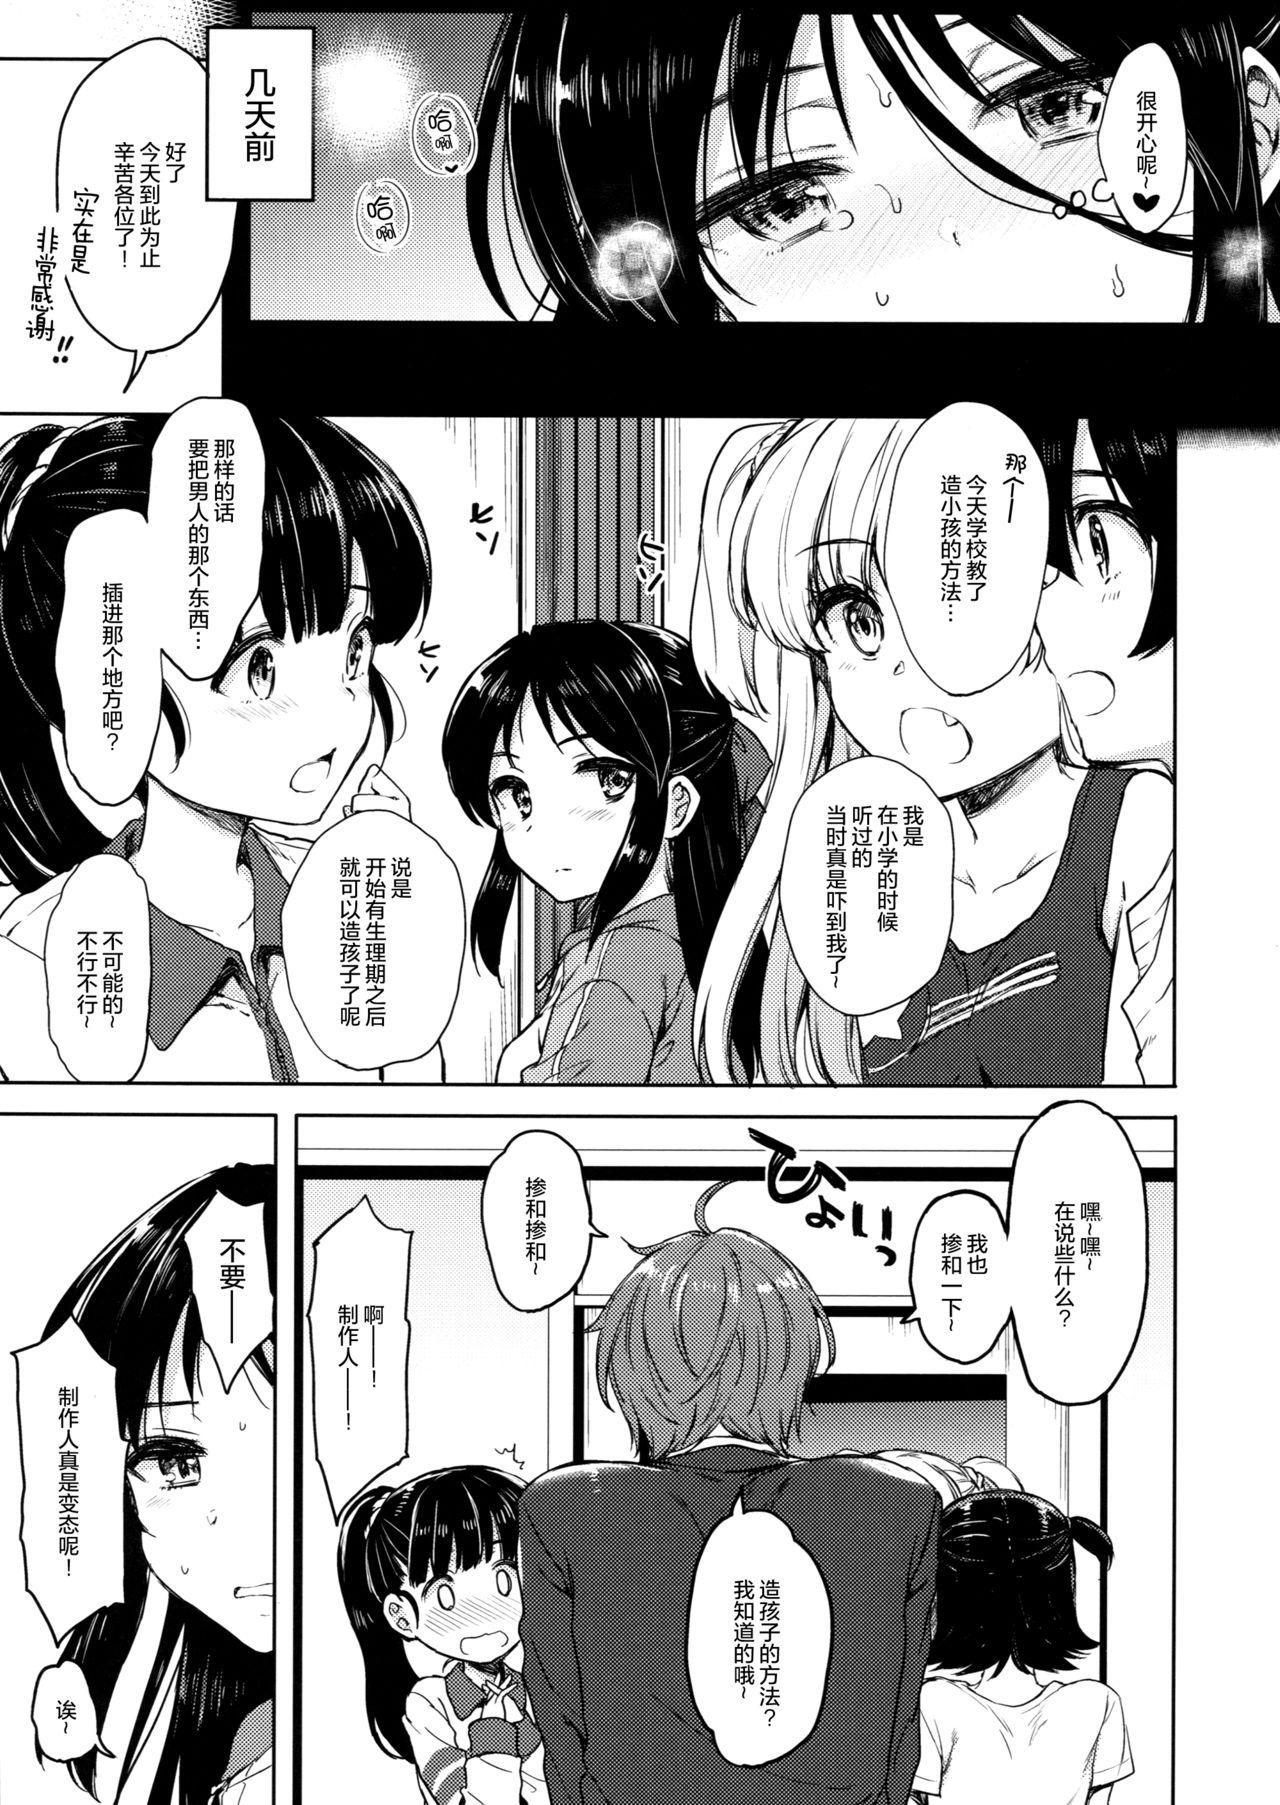 Best Blowjobs Ever Hajimete no Alice - The idolmaster Squirting - Page 7